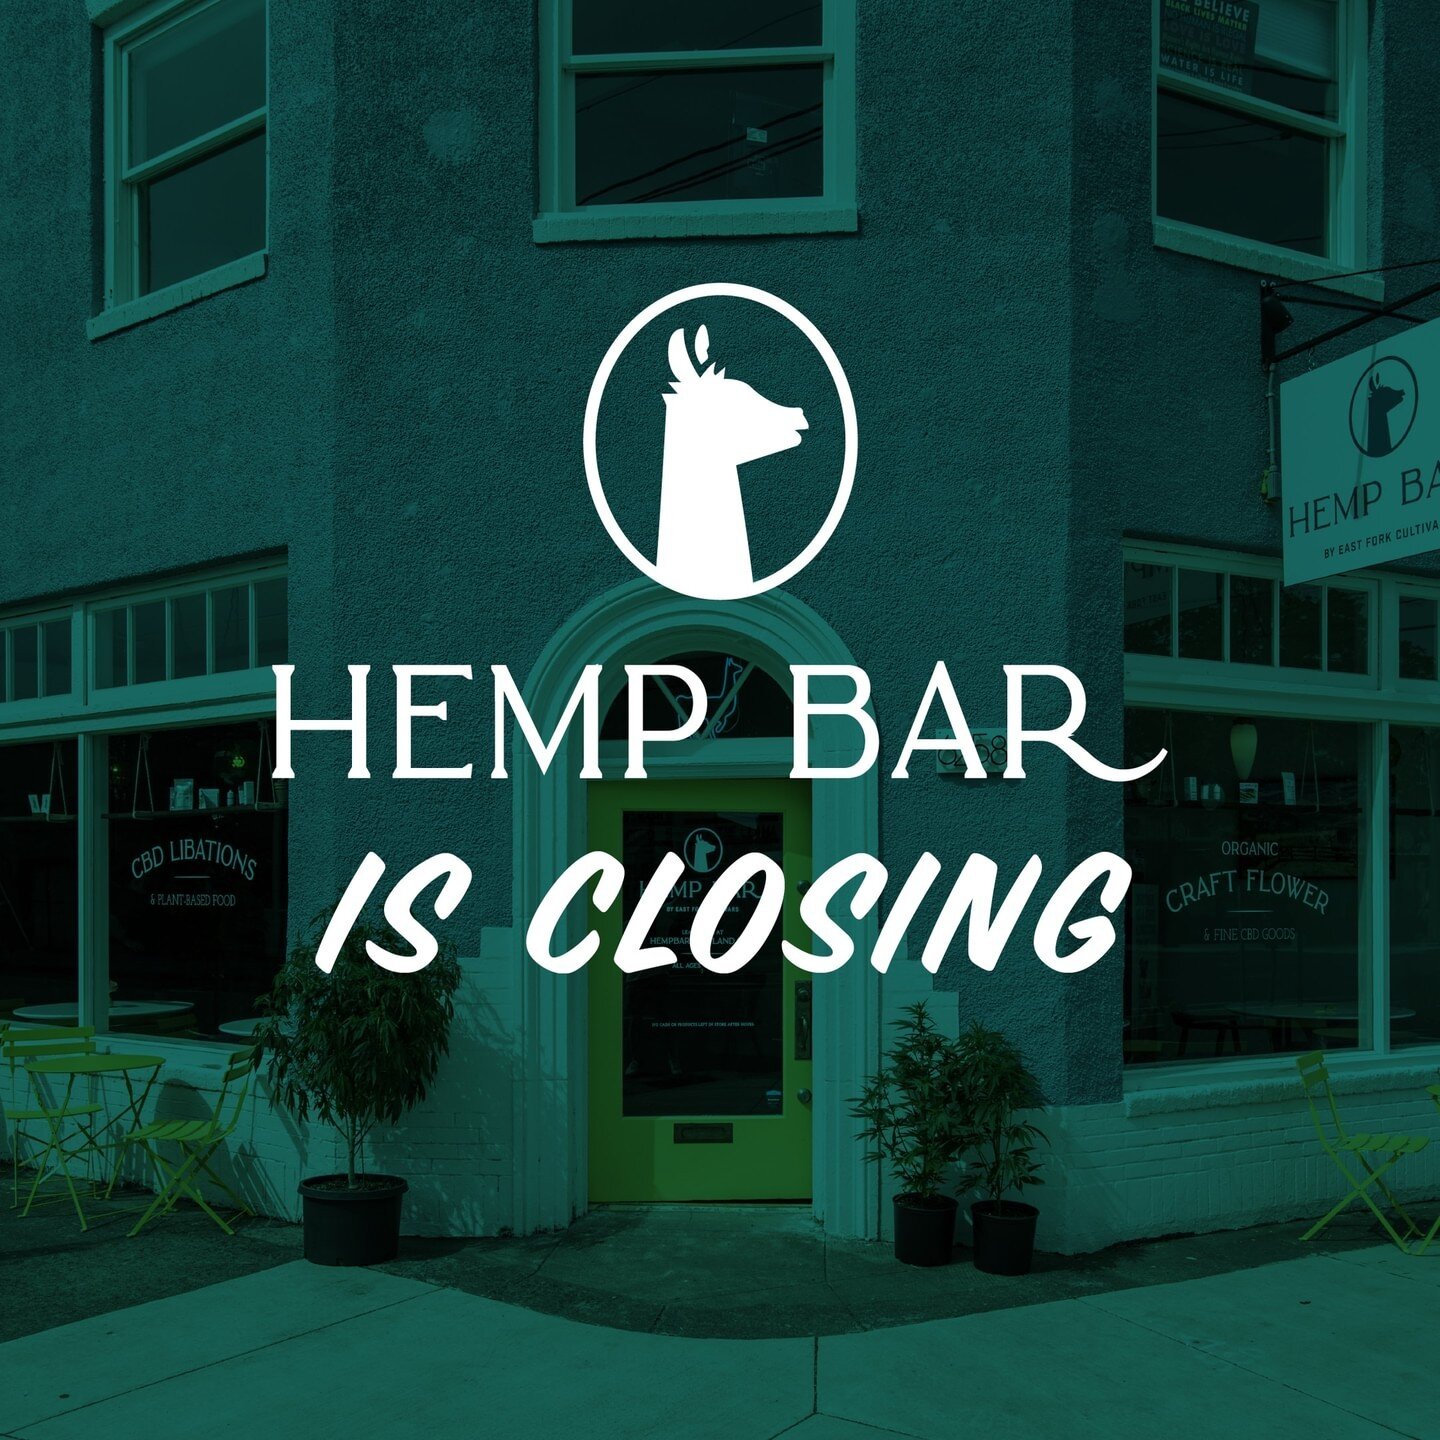 After an exciting two years, we have made the difficult decision to close Hemp Bar.⁠
⁠
In 2020, we joined a group of friends to purchase an historic, rundown building in Portland&rsquo;s up-and-coming Foster-Powell neighborhood. Despite the uncertain